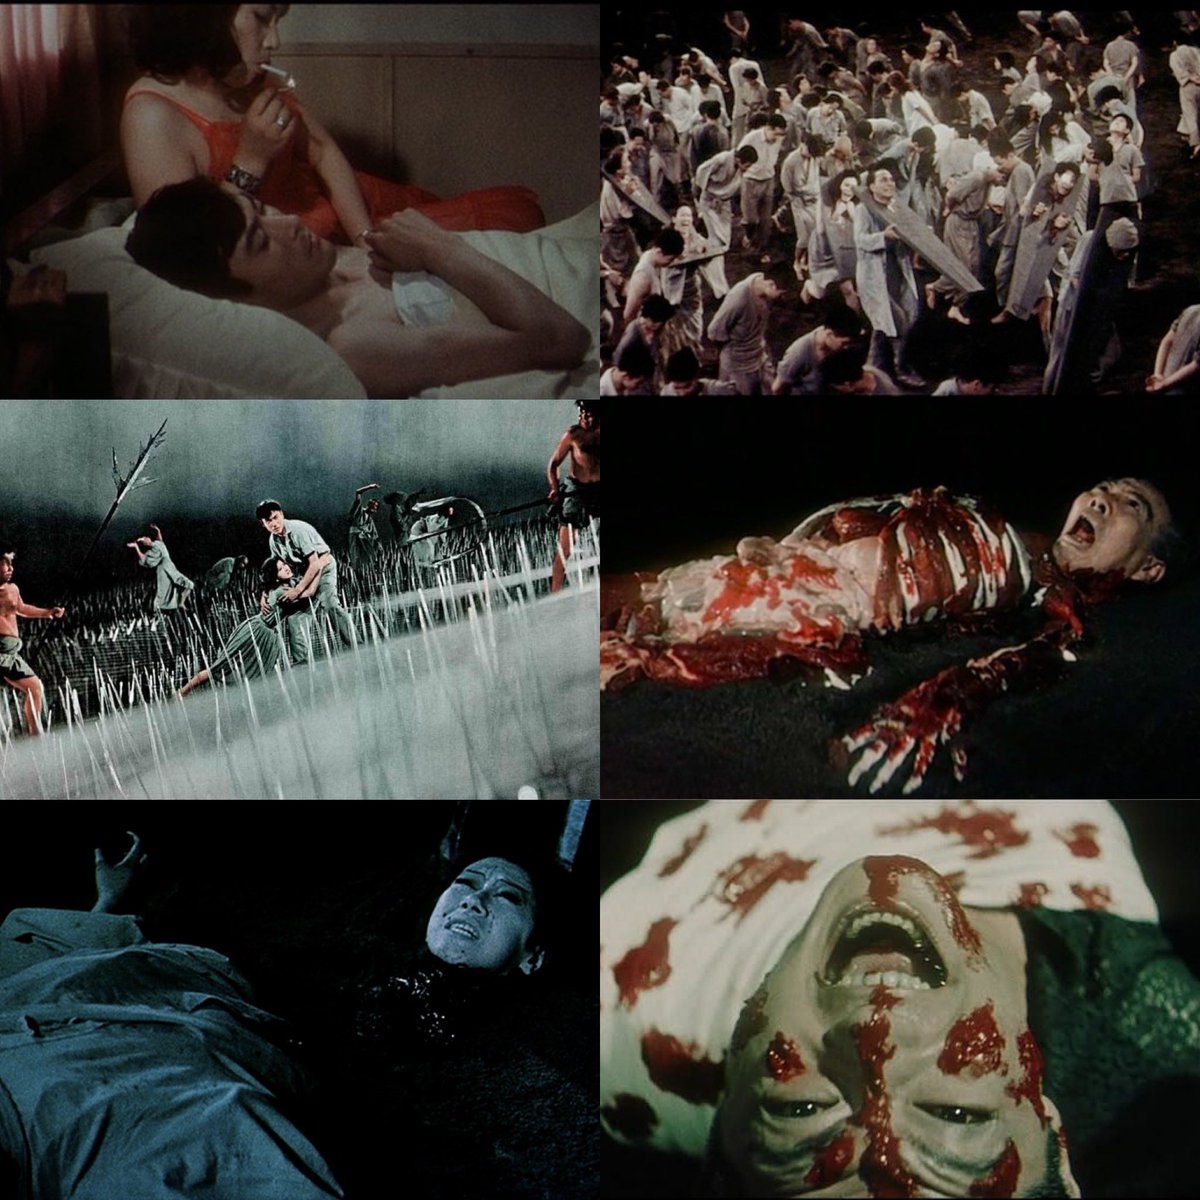 Jigoku (1960, Nobuo Nakagawa) Rivers of blood and endless tortures; one of the earliest films to feature gore.